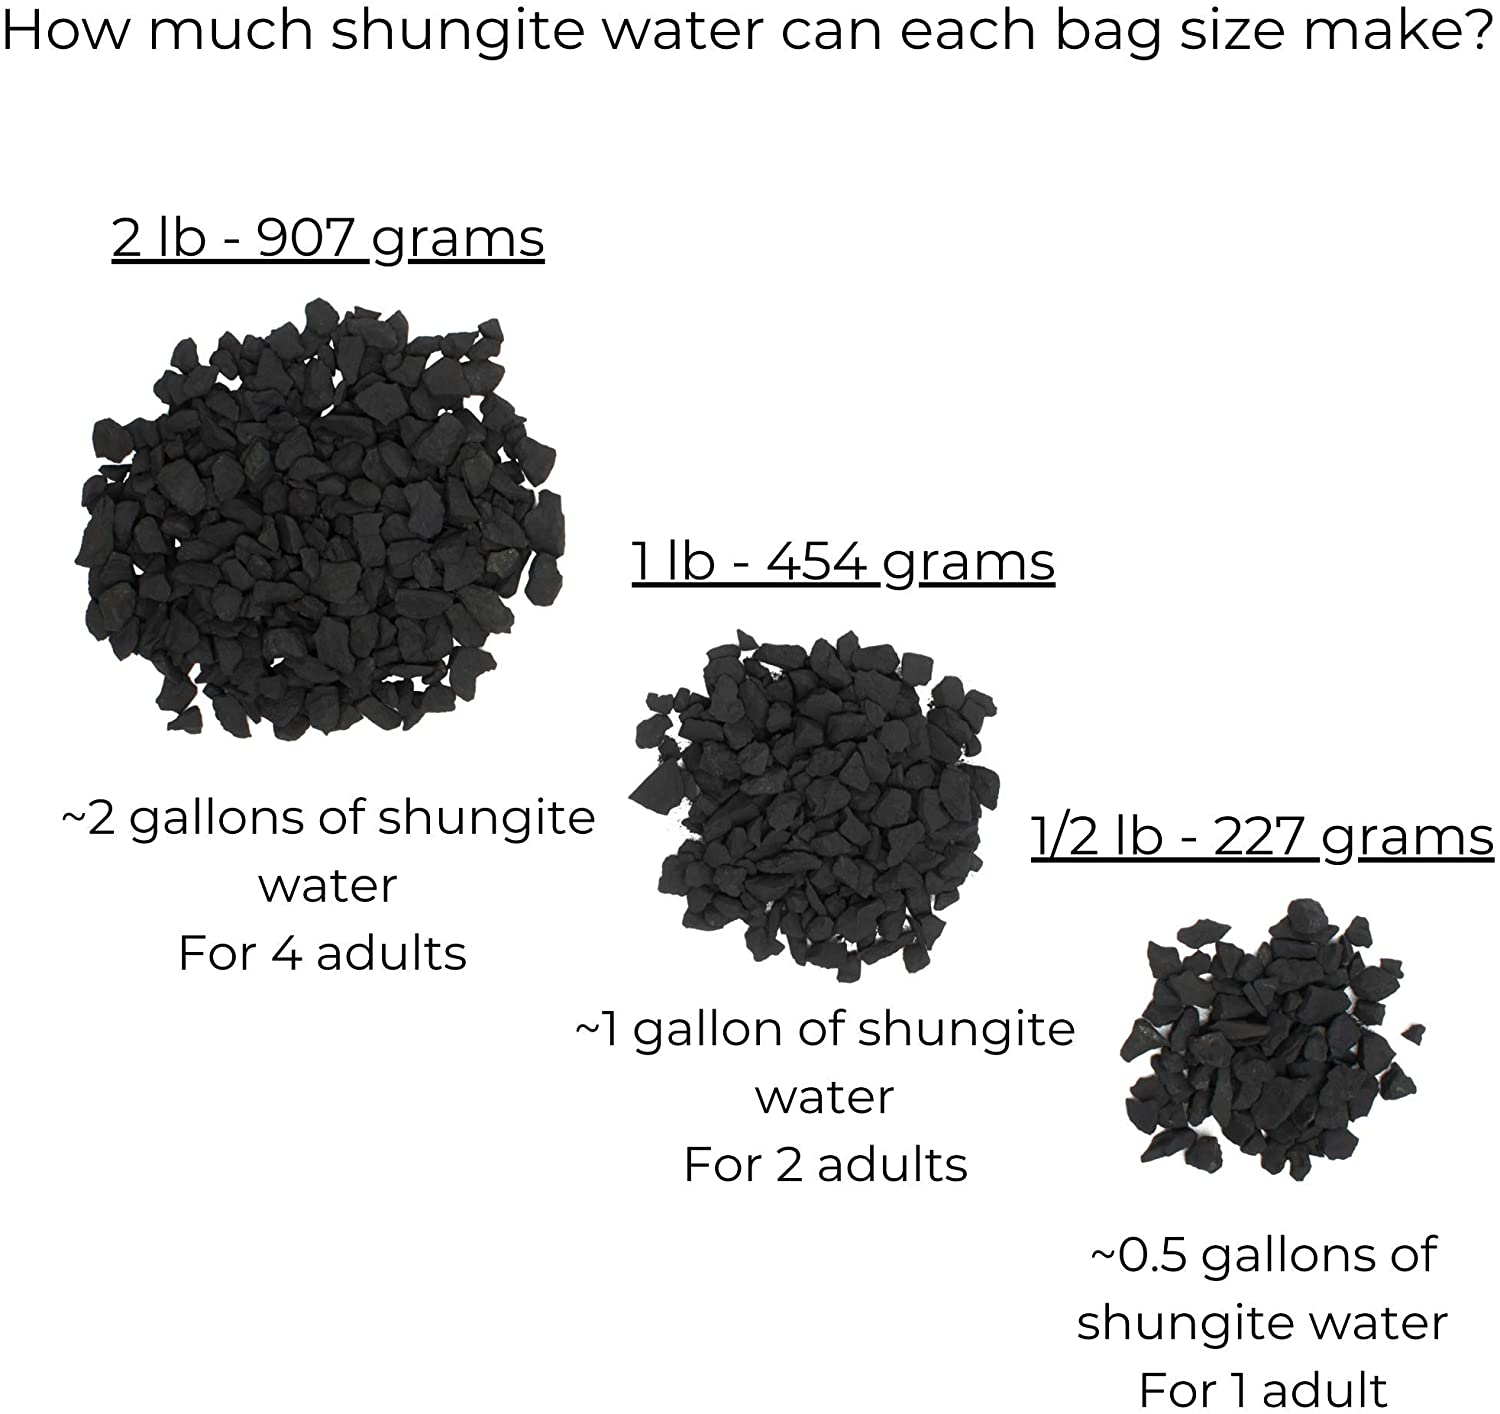 purify and mineralise water easy to stick in the tub and provide grip against slipping 31.5x21.5 cm Black Colour TJC Shungite Net Multi-Use/Bath Mat Shungite Stone filter to clean 